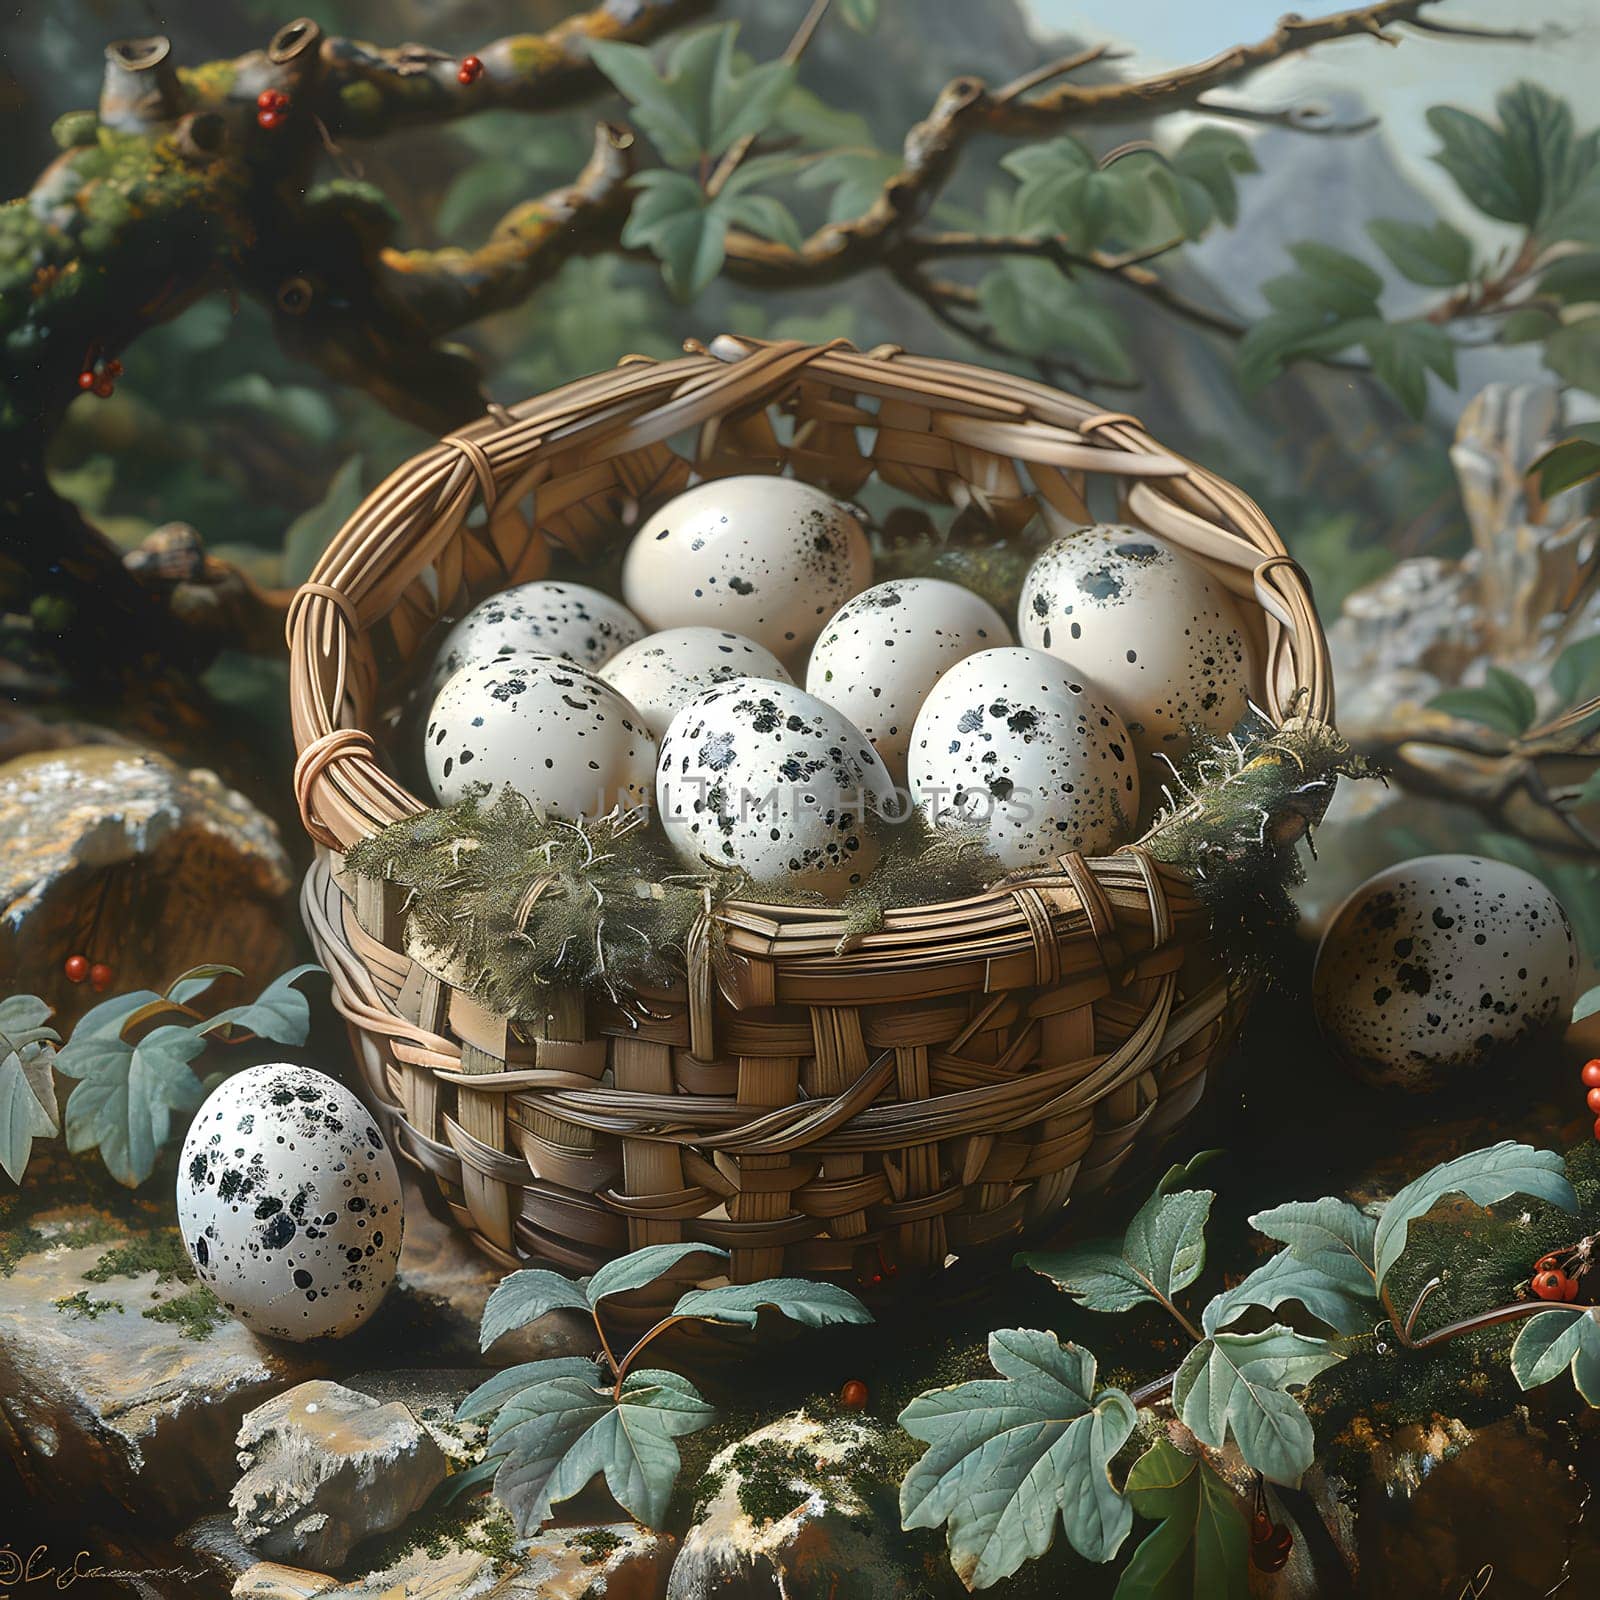 A nest made of twigs and plant fibers holds a beautiful arrangement of white eggs with black spots, resembling a piece of art in natures painting